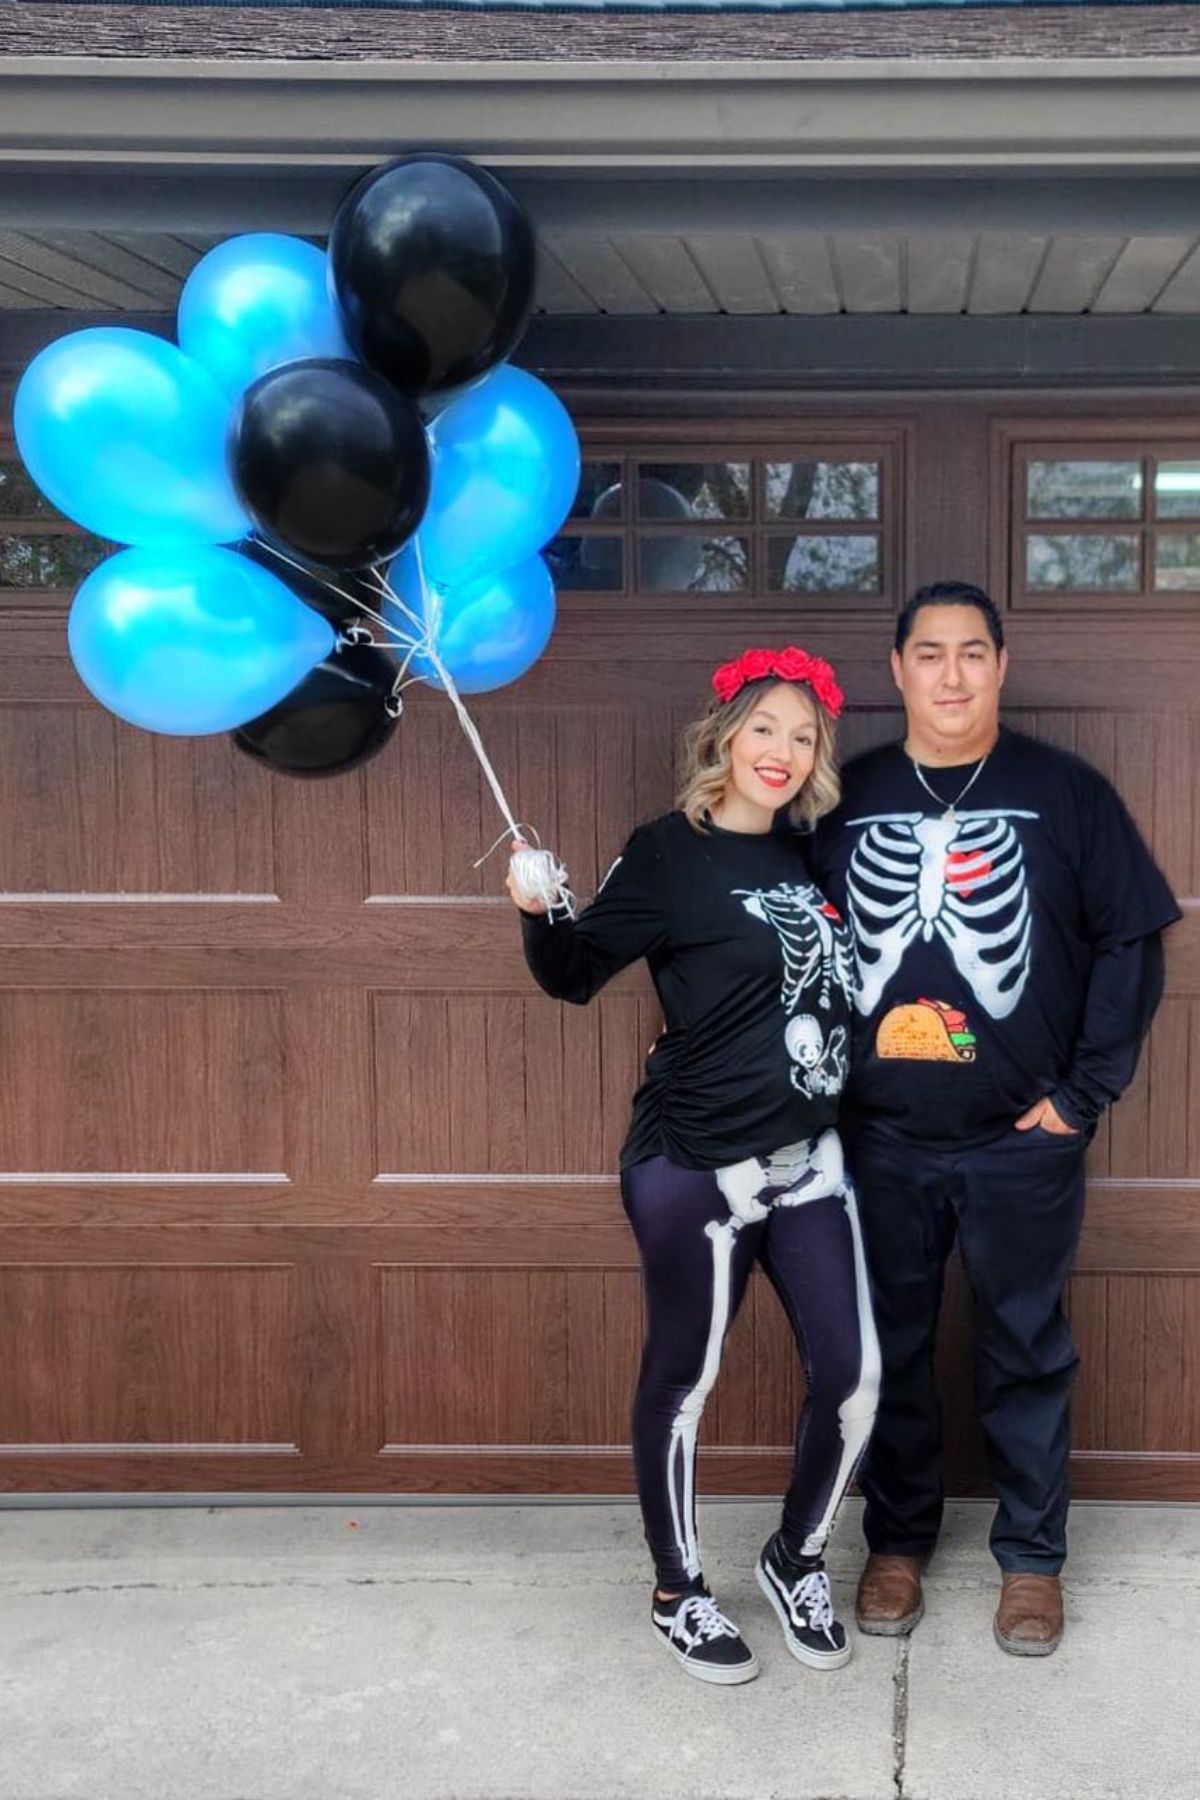 A couple dressed in skeleton costumes holding blue and black balloons.